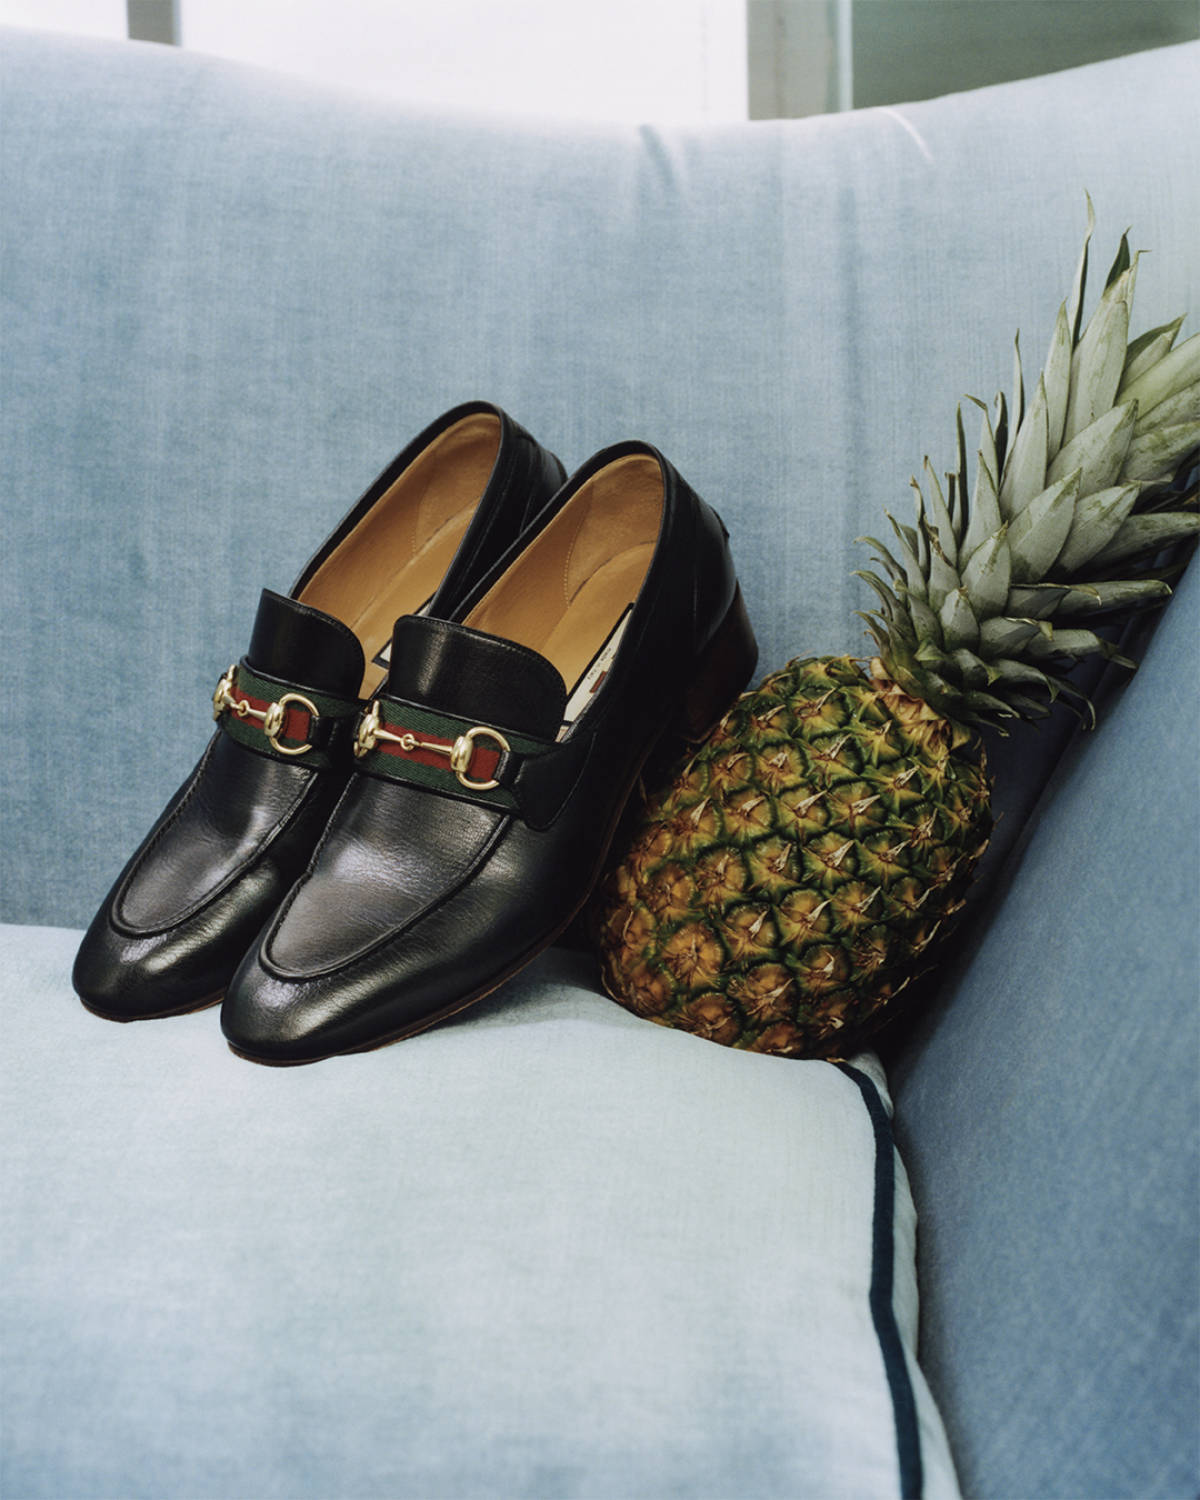 Gucci Present Its New Pineapple Collection